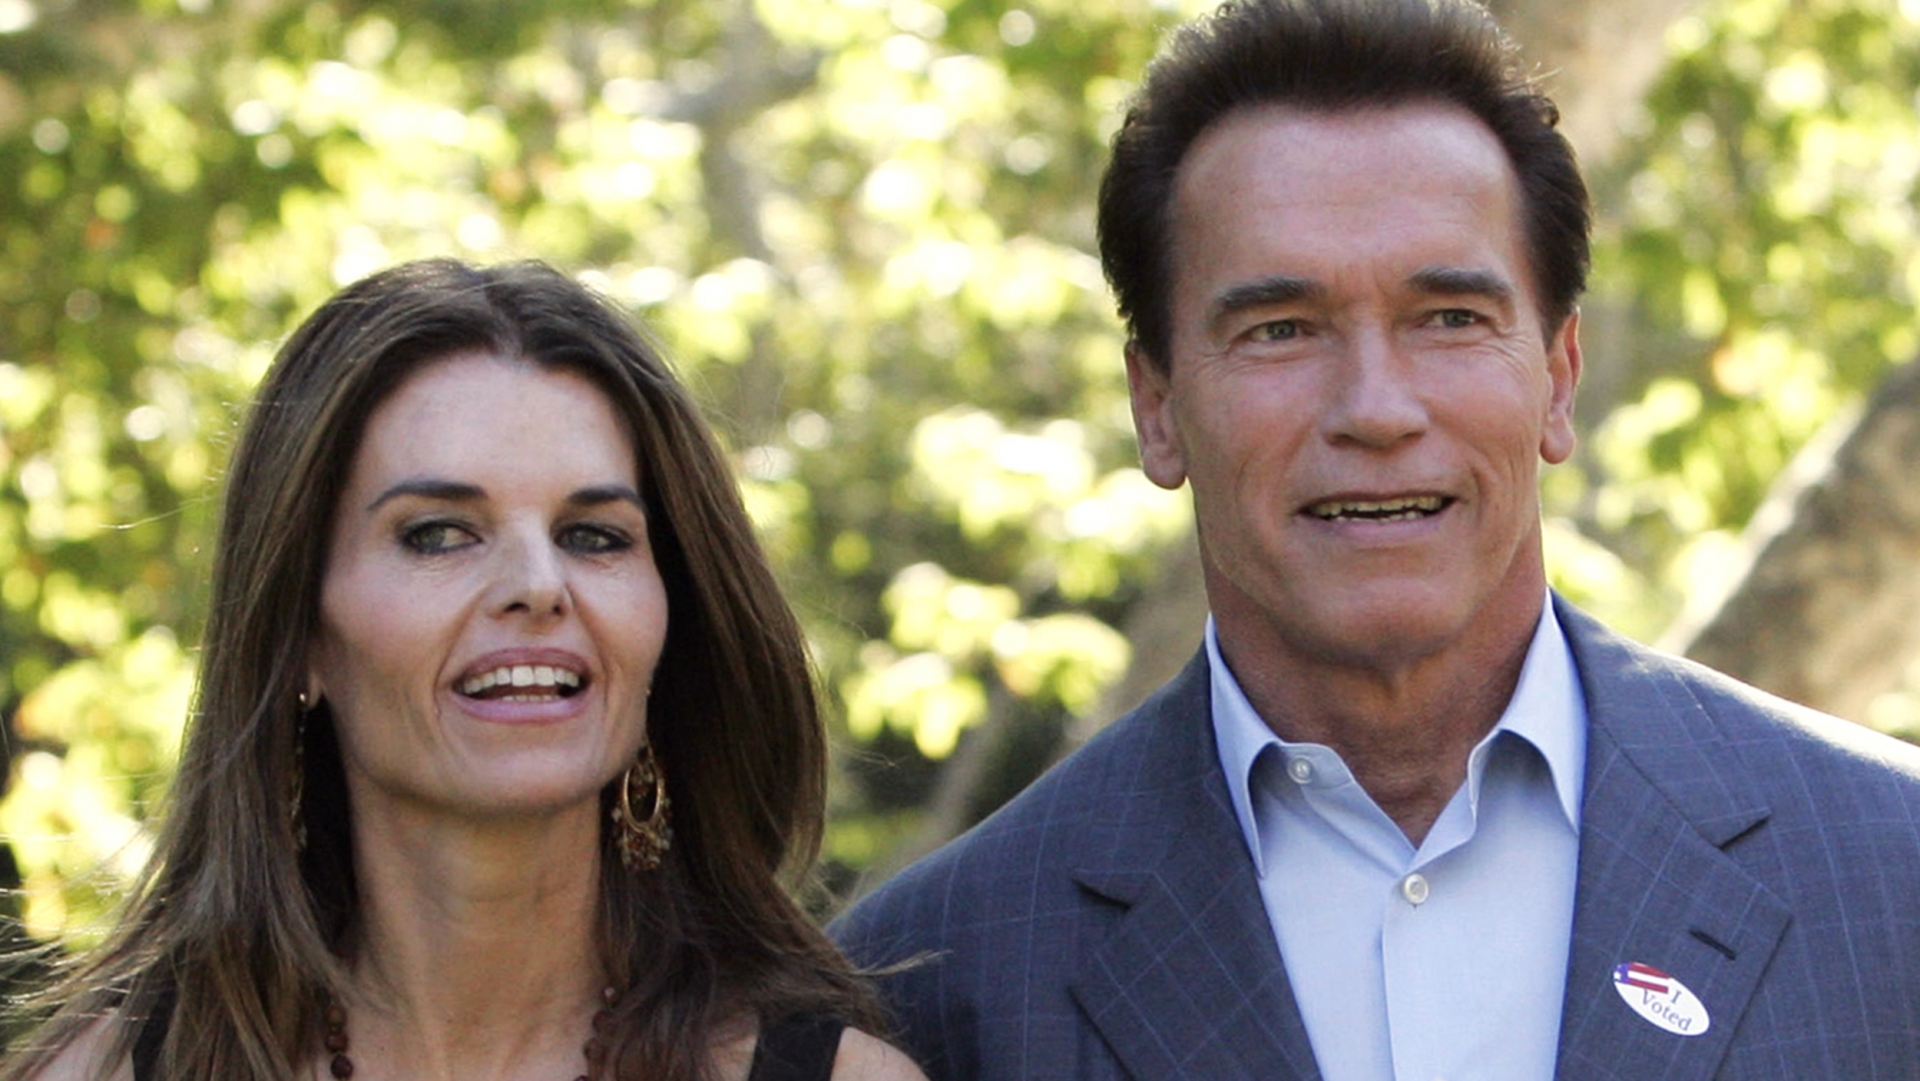 Who is Arnold Schwarzenegger: Biography, Profile of Actor and Political Careers